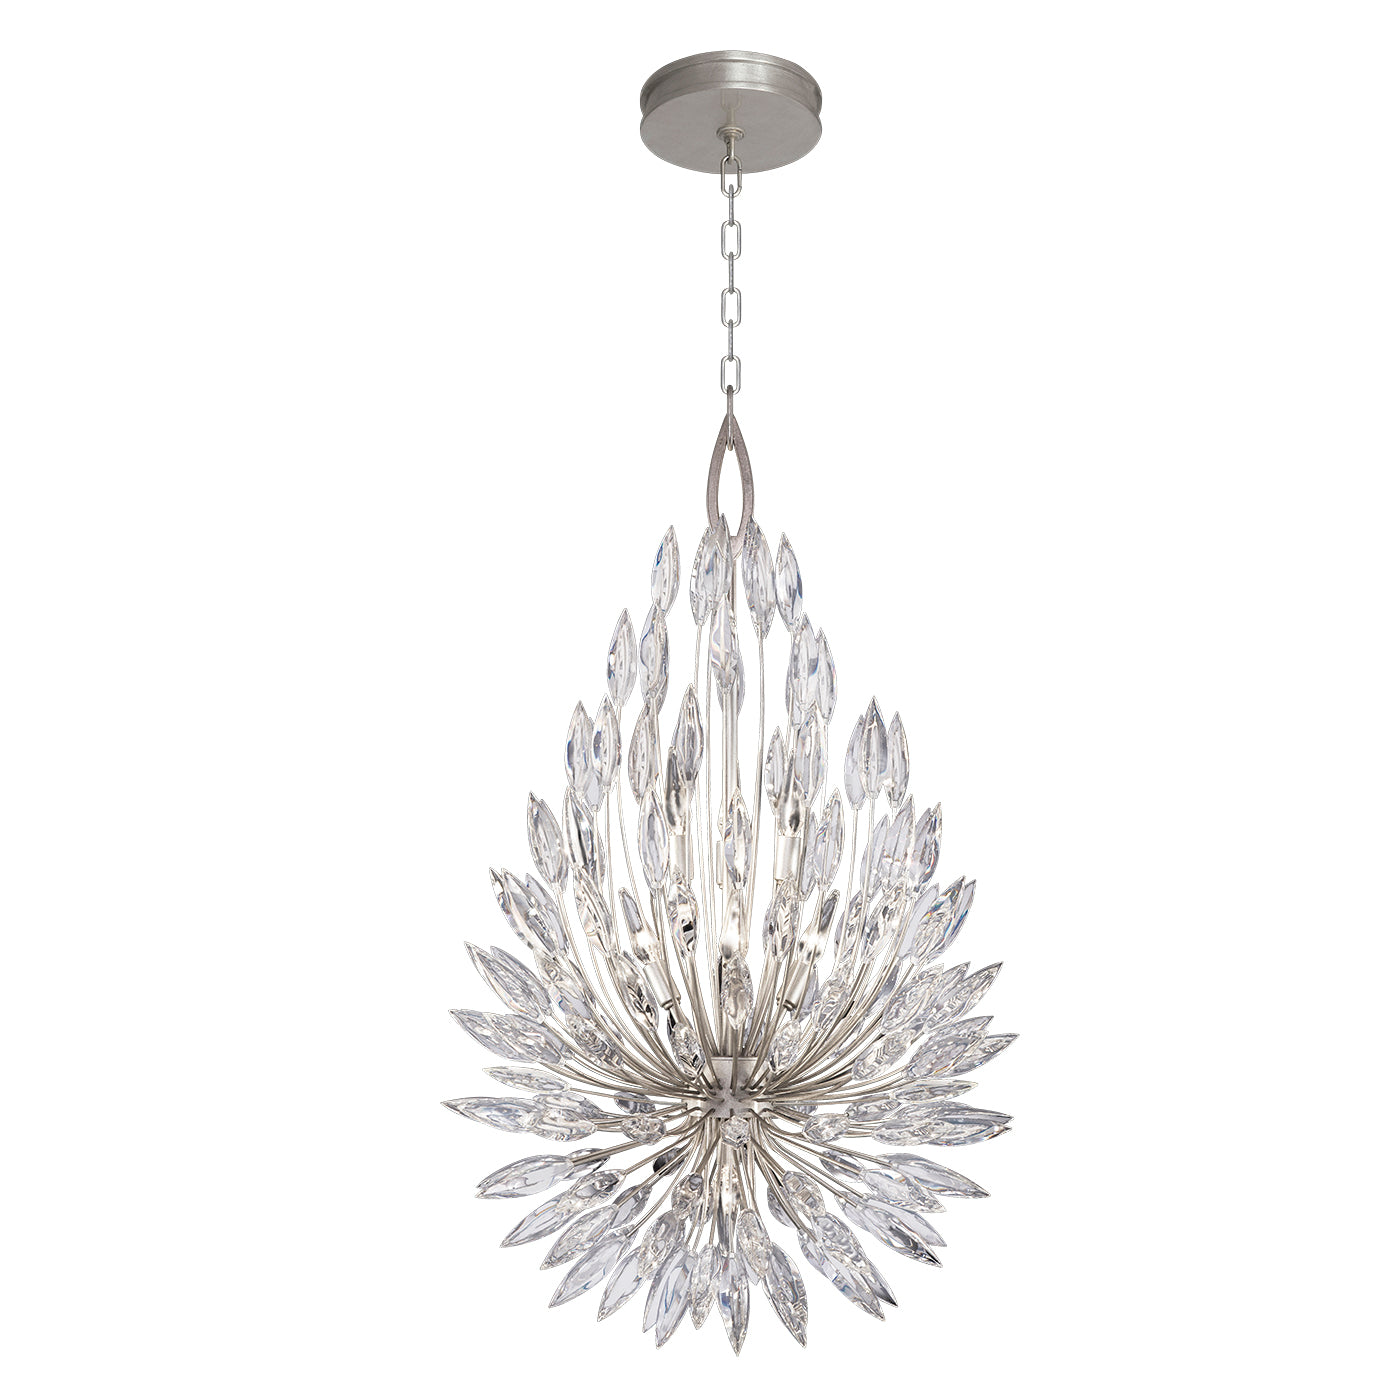 Fine Art Handcrafted Lighting Lily Buds Pendant Chandeliers Fine Art Handcrafted Lighting Silver 24 x 40 